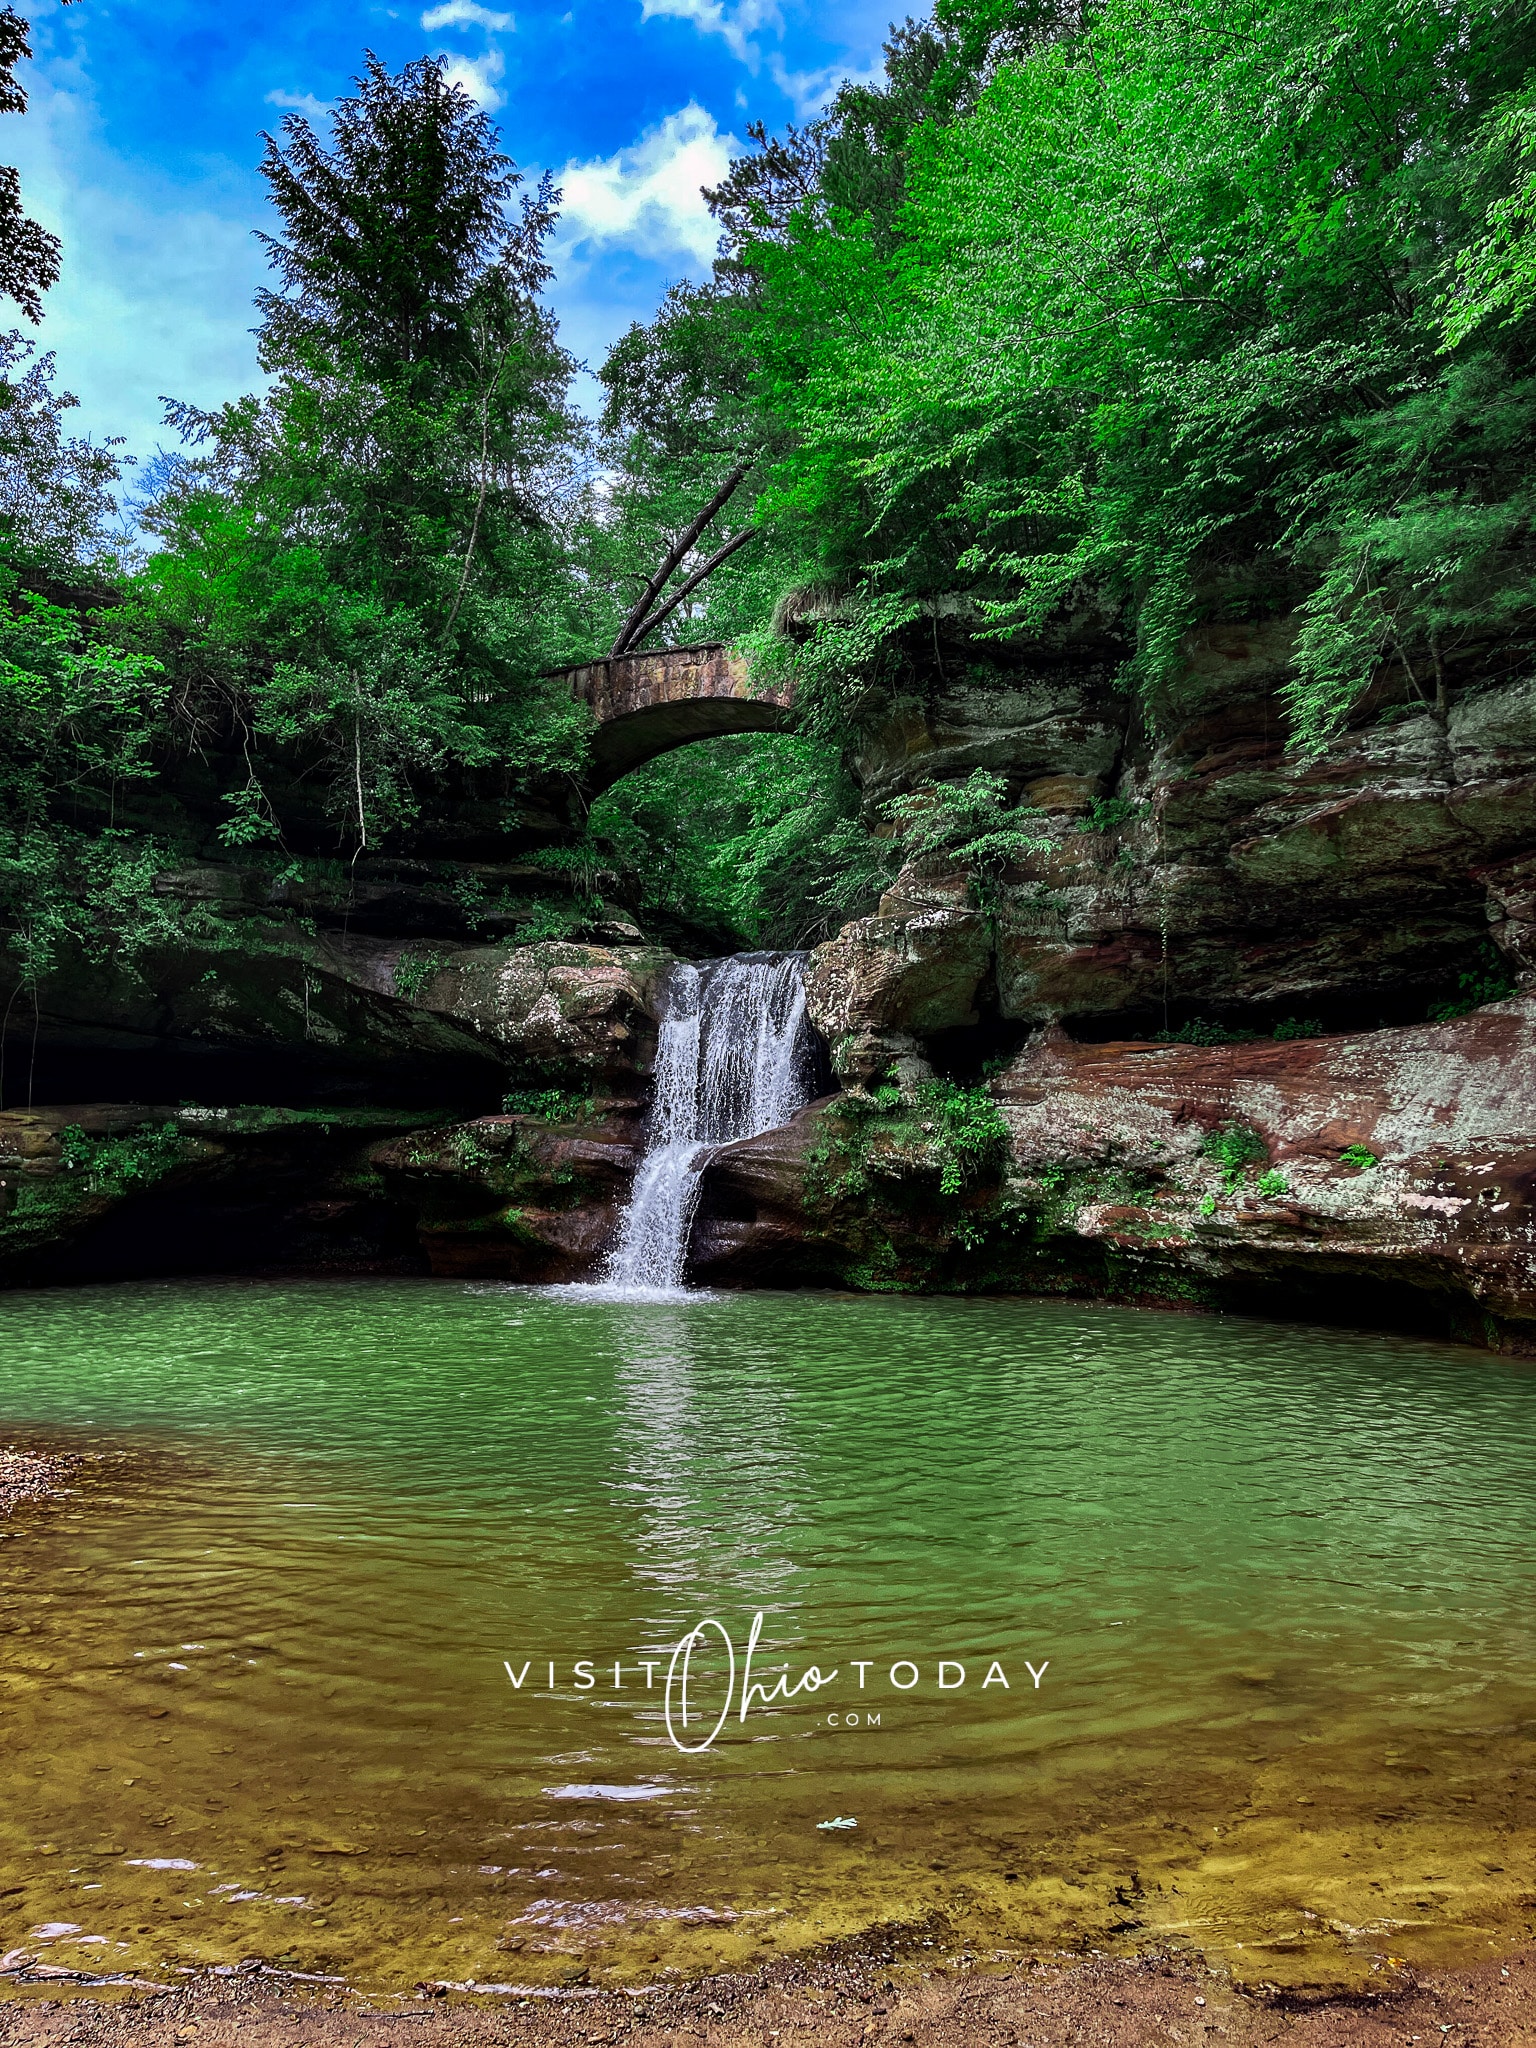 vertical photo showing the waterfall at old man's cave. Water fall flows under a stone bridge into a large pond Pond is surrounded by rocky walls. 